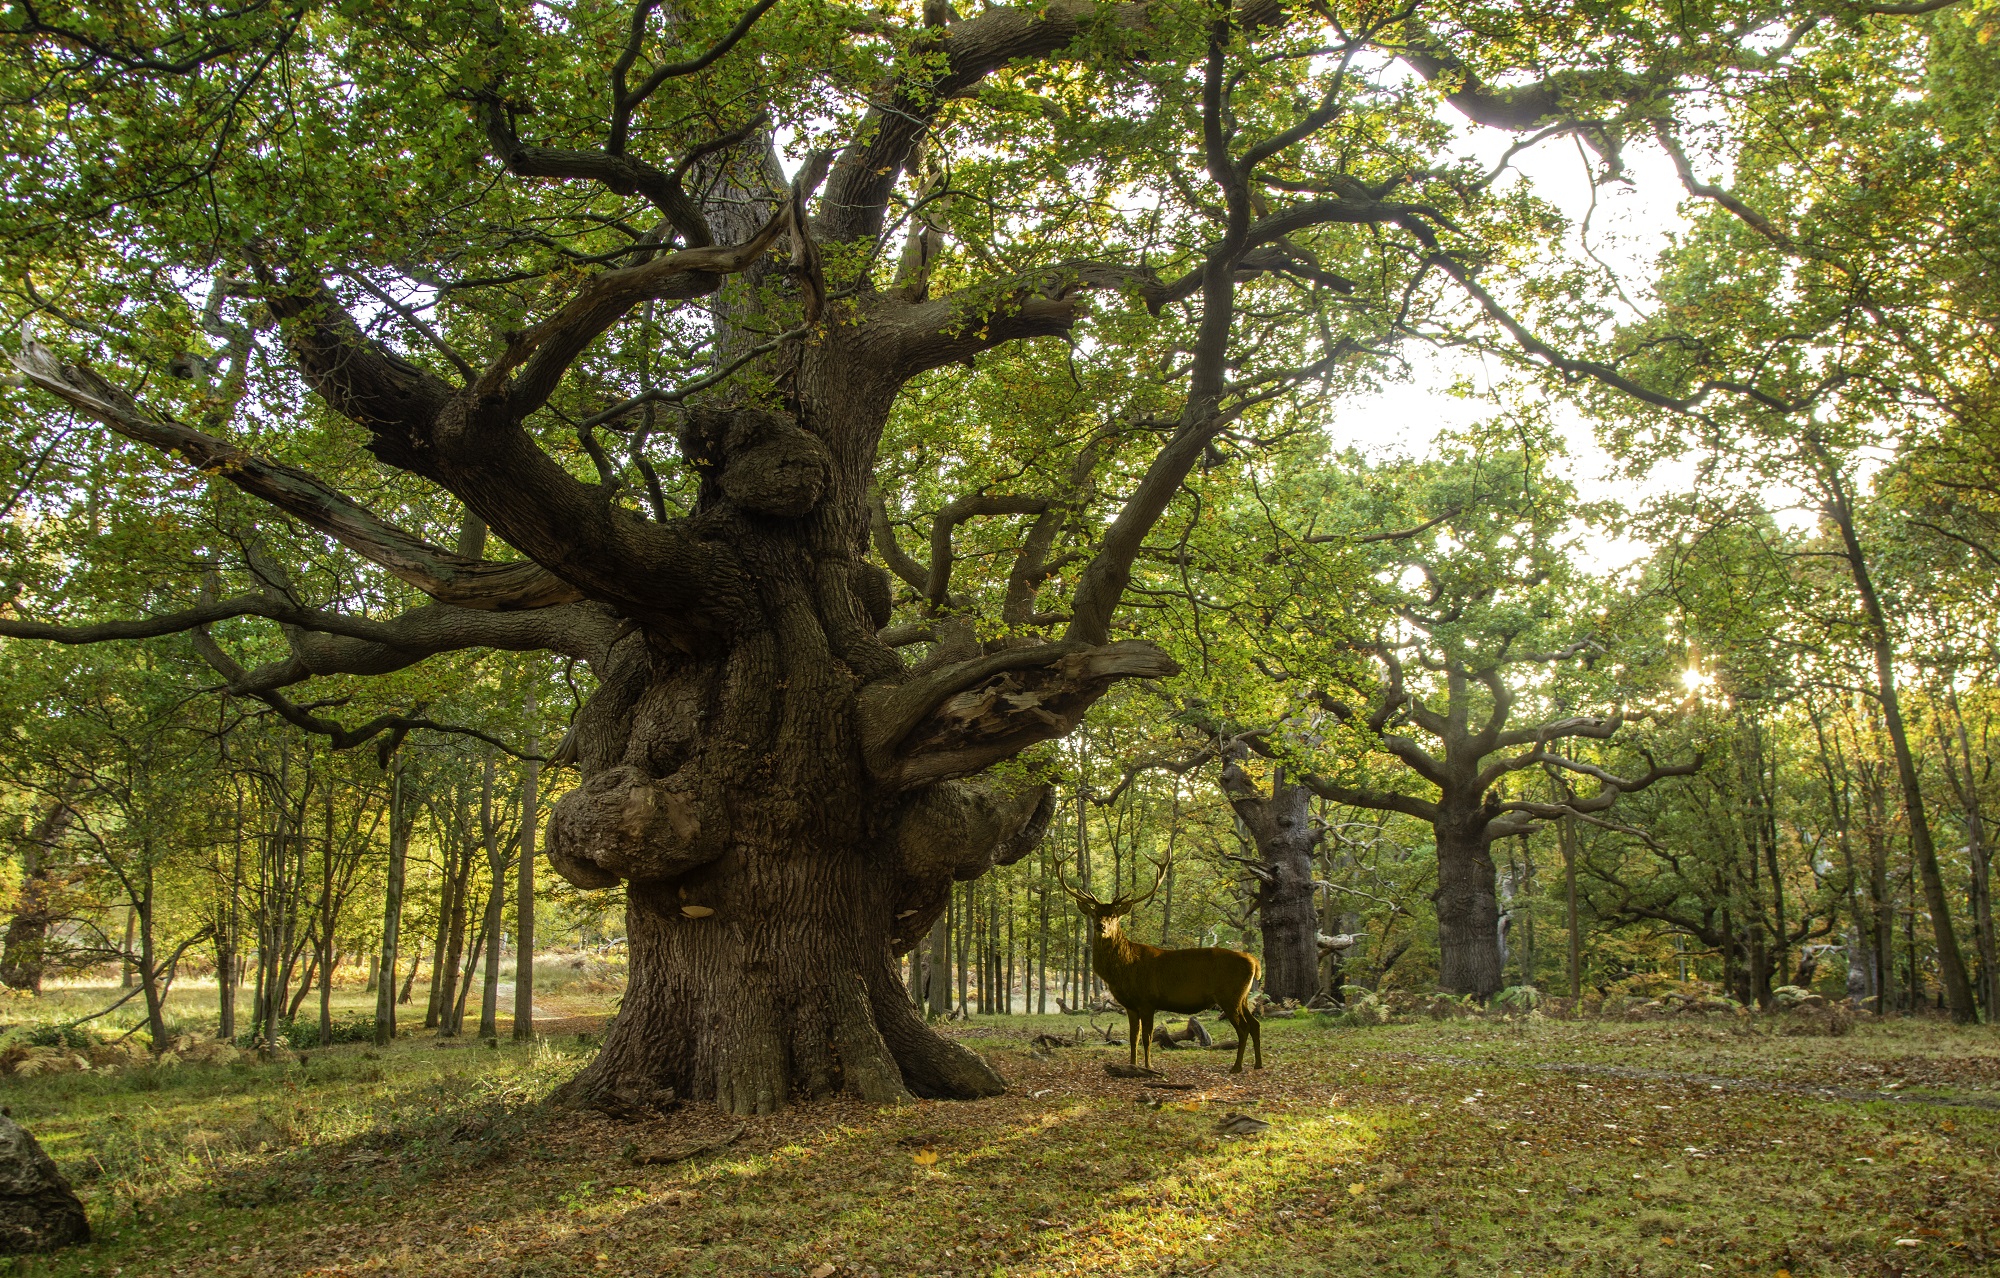 A Stag stood next to a large tree within the woodland of Windsor Great Park